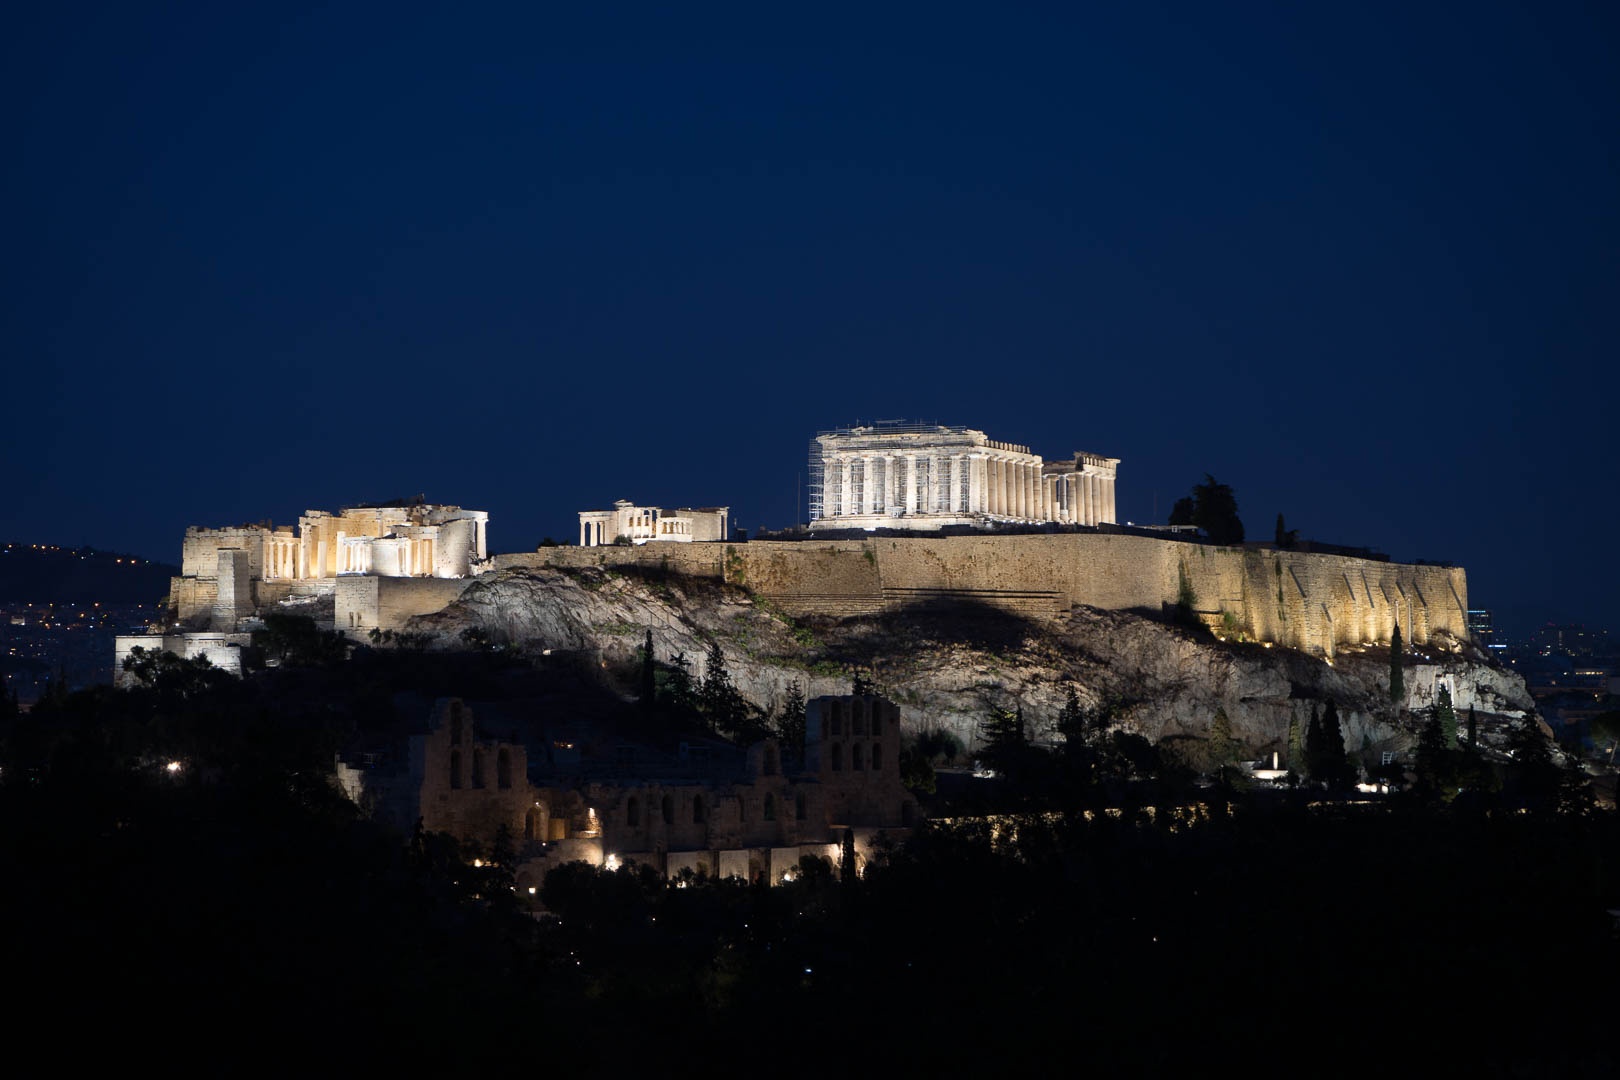 The Akropolis at night.